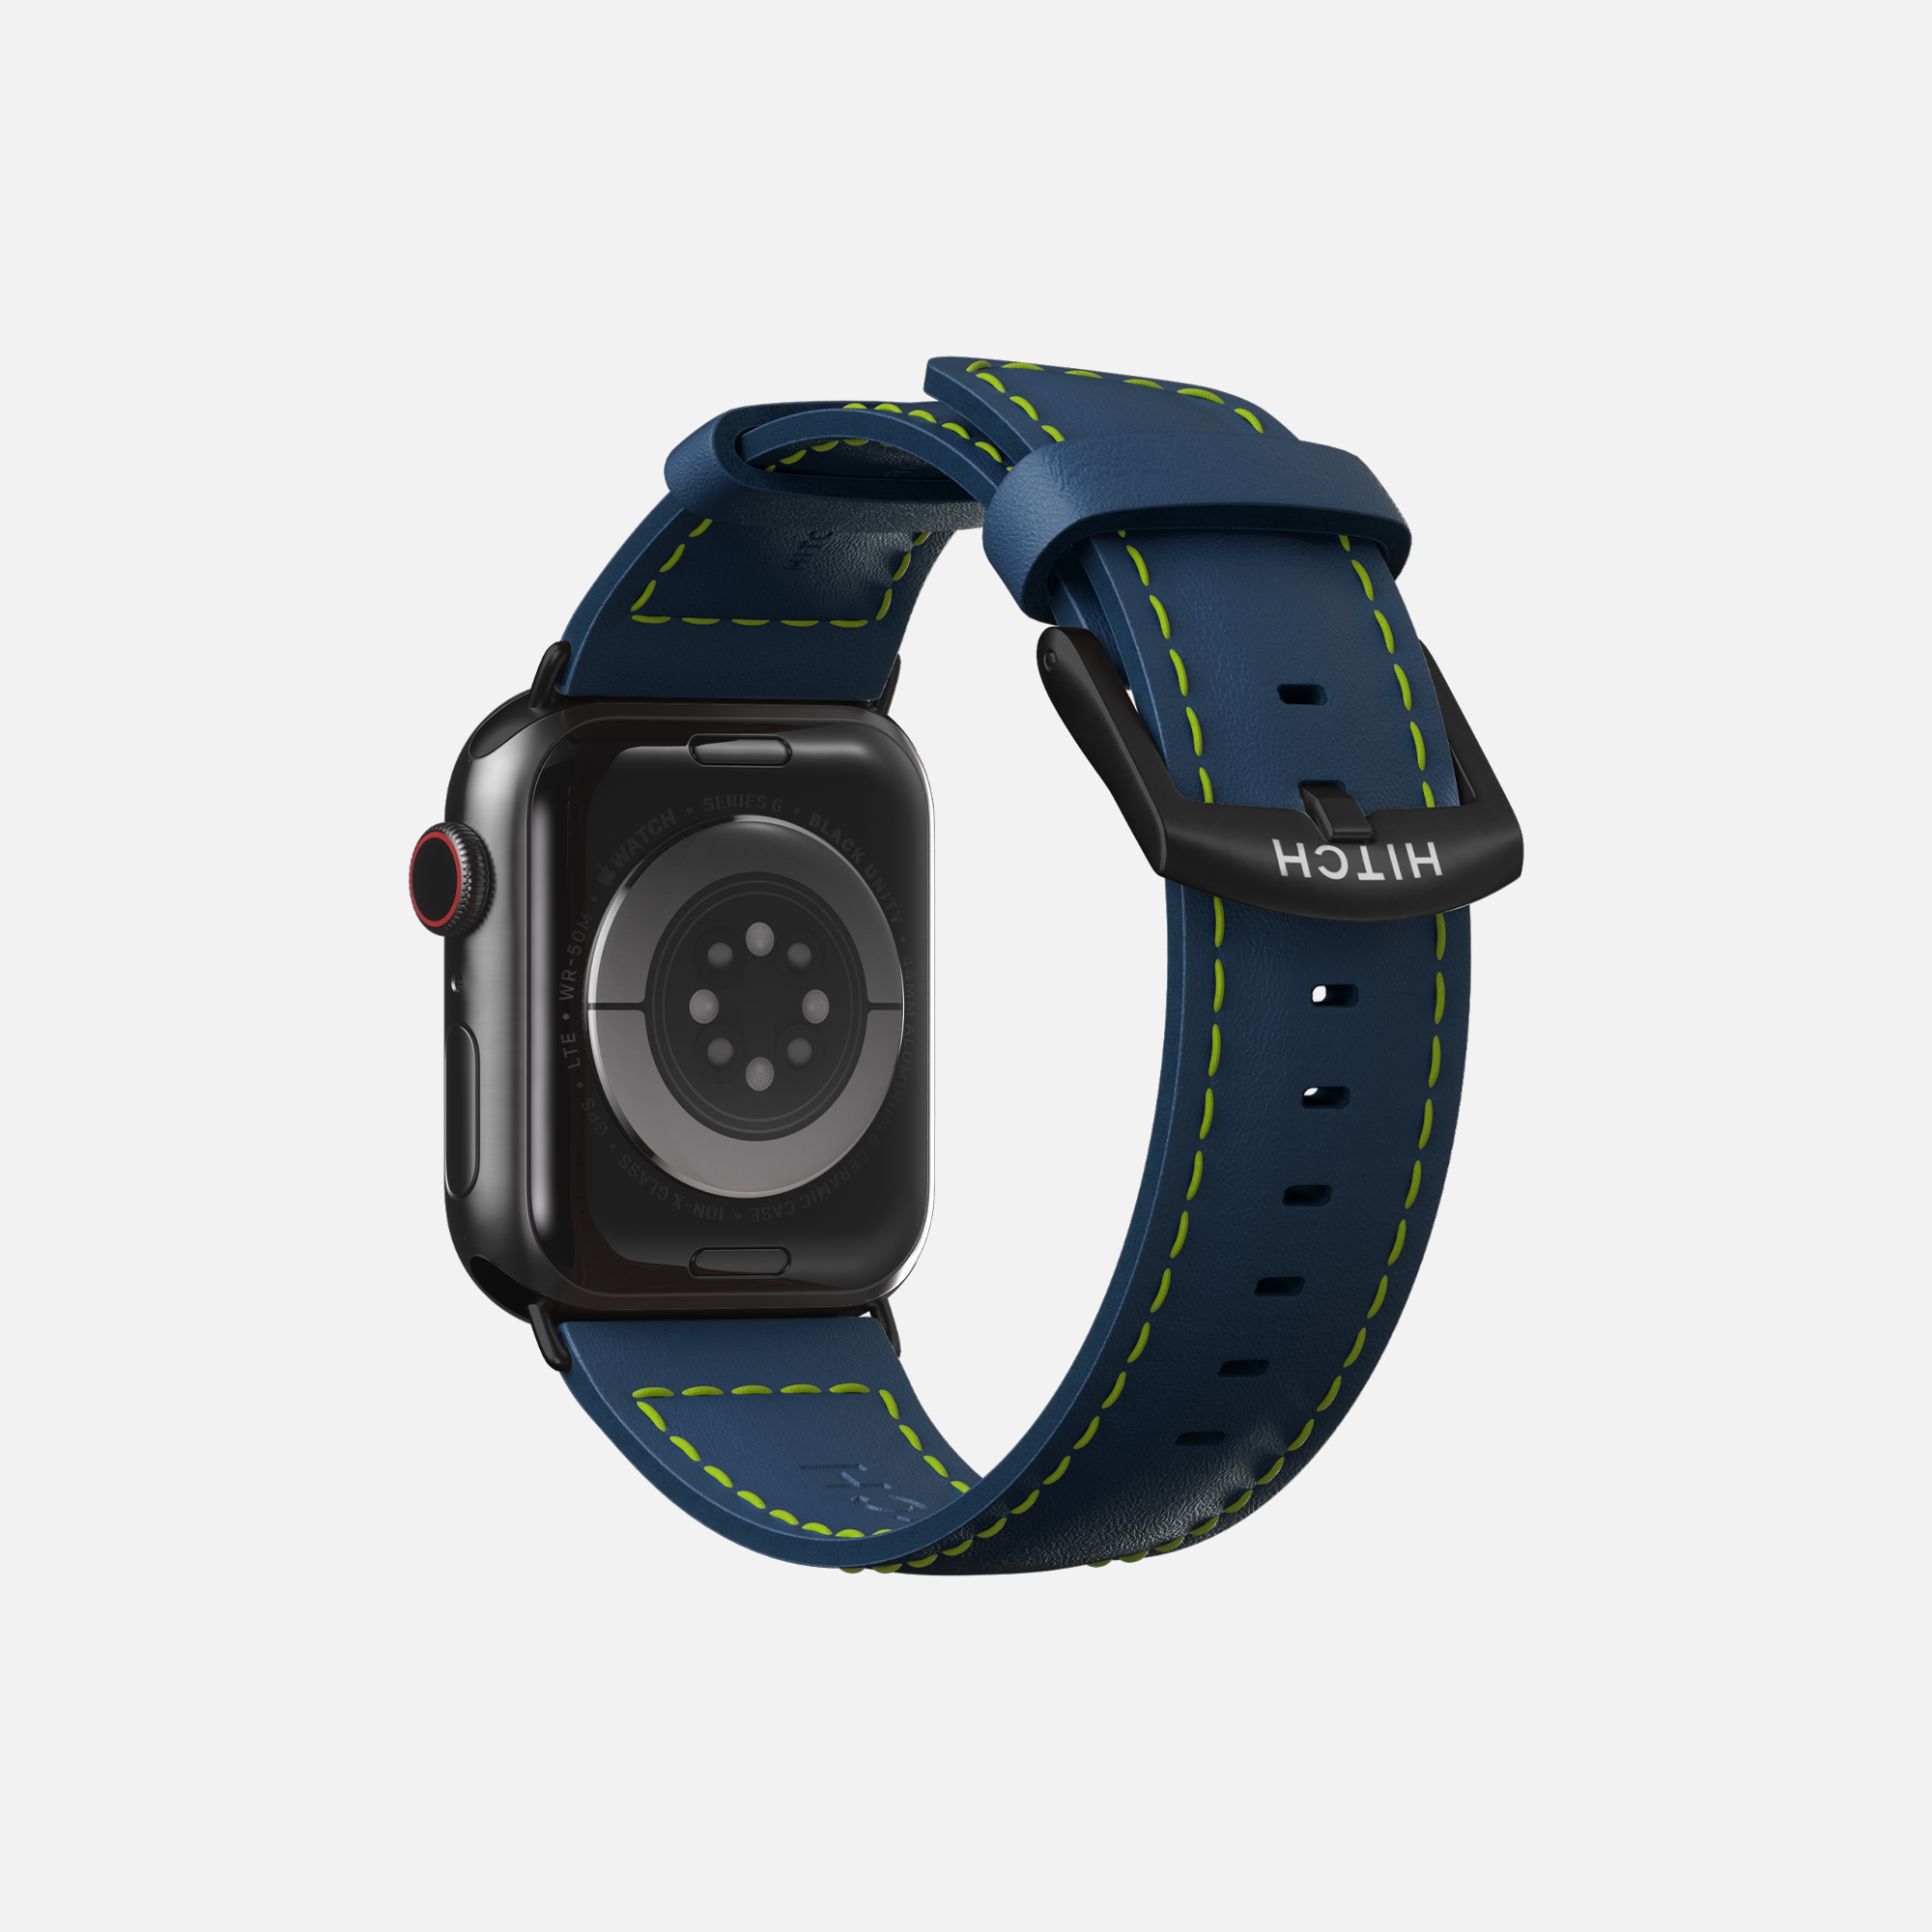 Apple Smartwatch with a navy blue strap and green stitching, isolated on a white background."